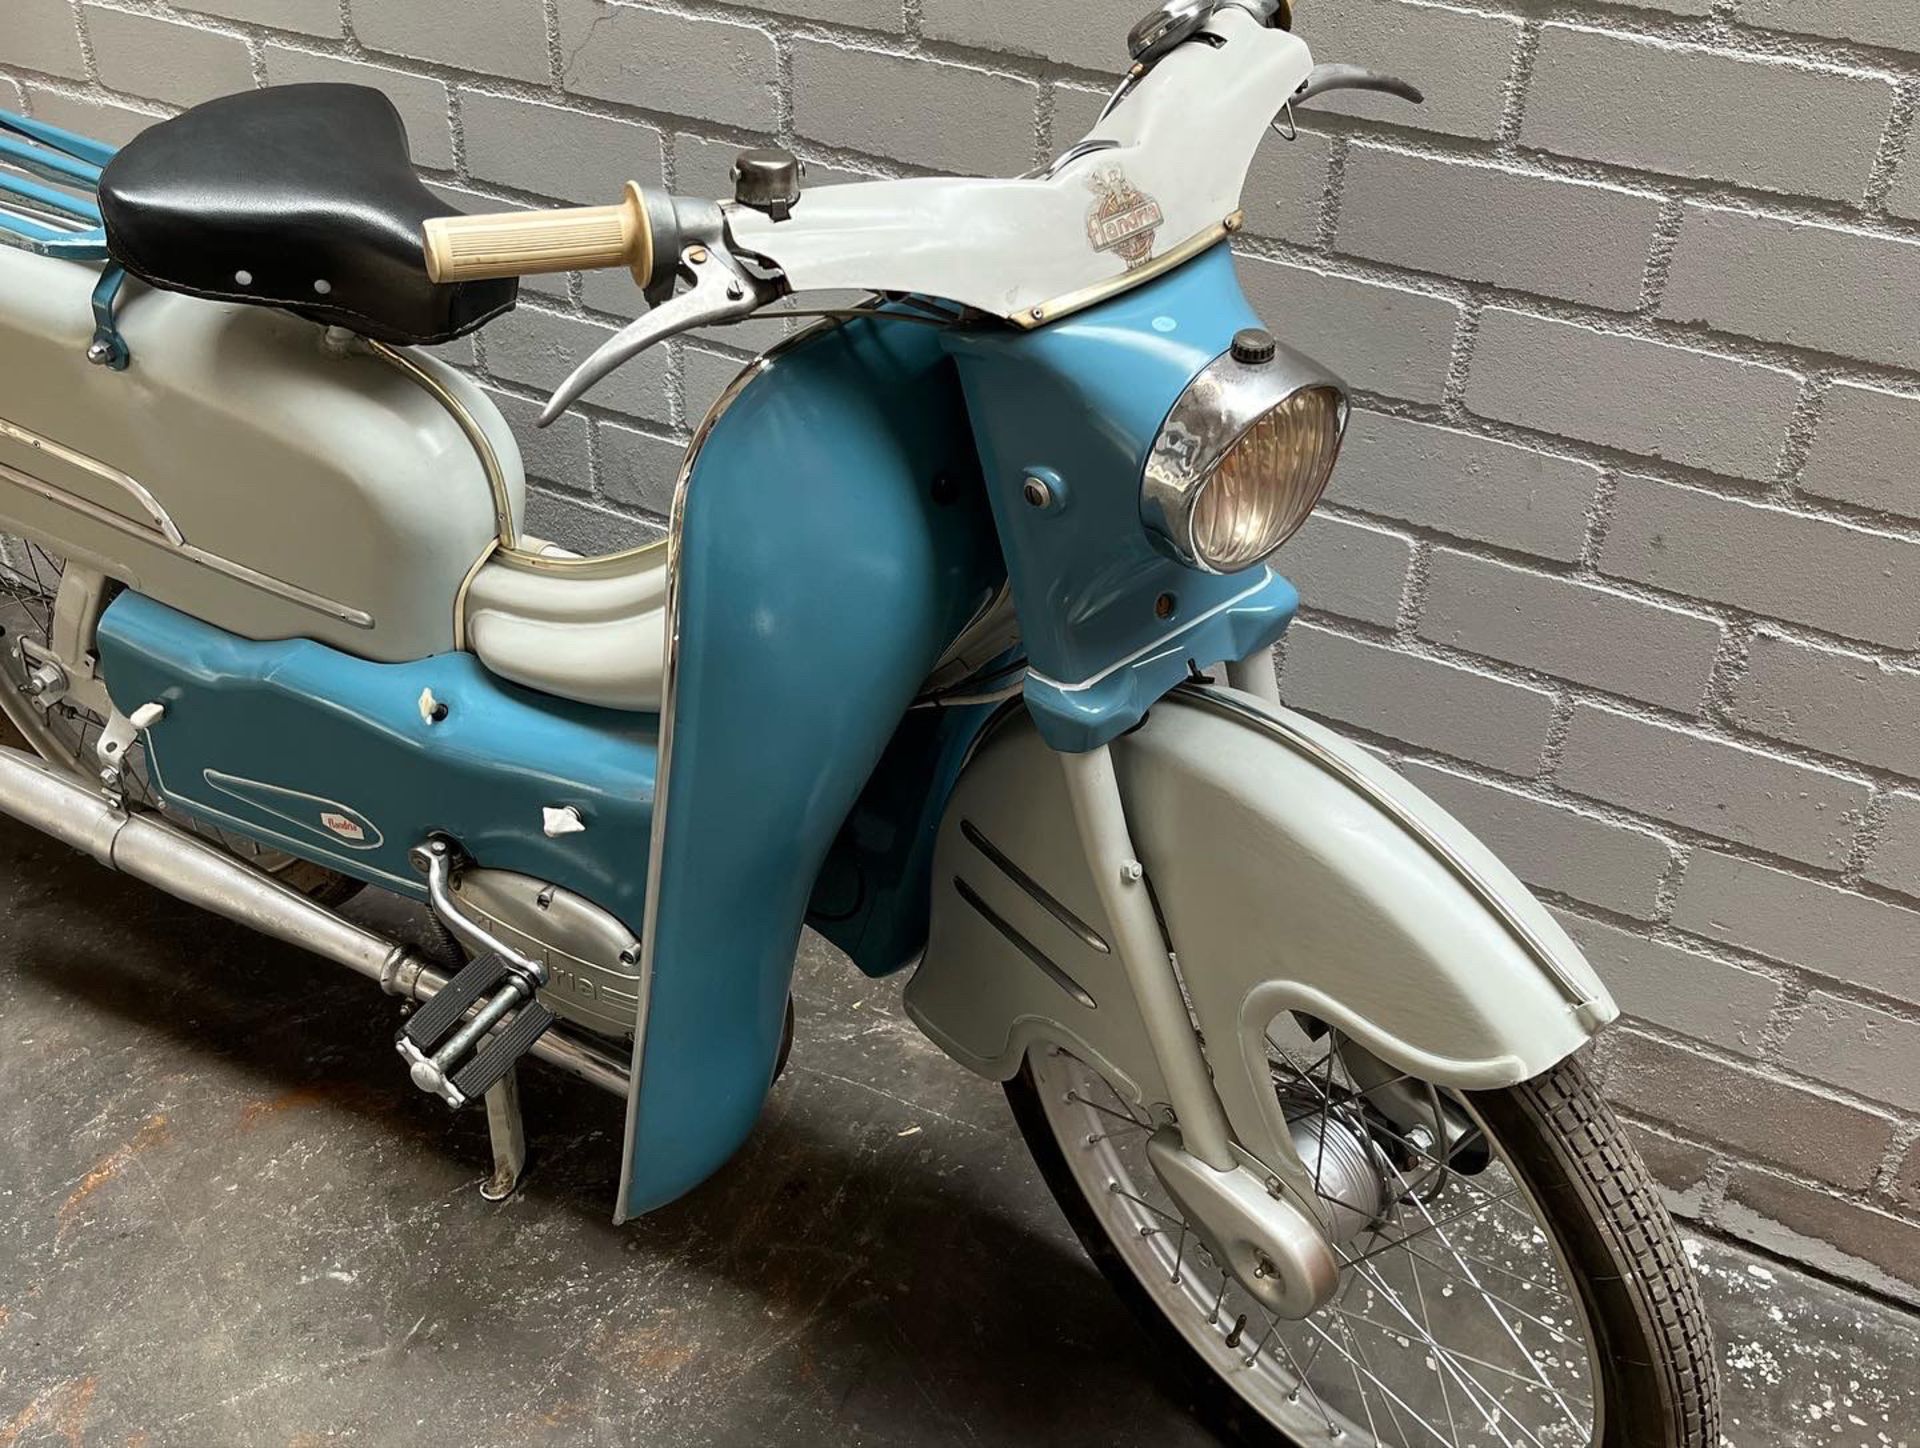 Vintage Flandria 49cc Moped ca. 1960s - Image 4 of 10